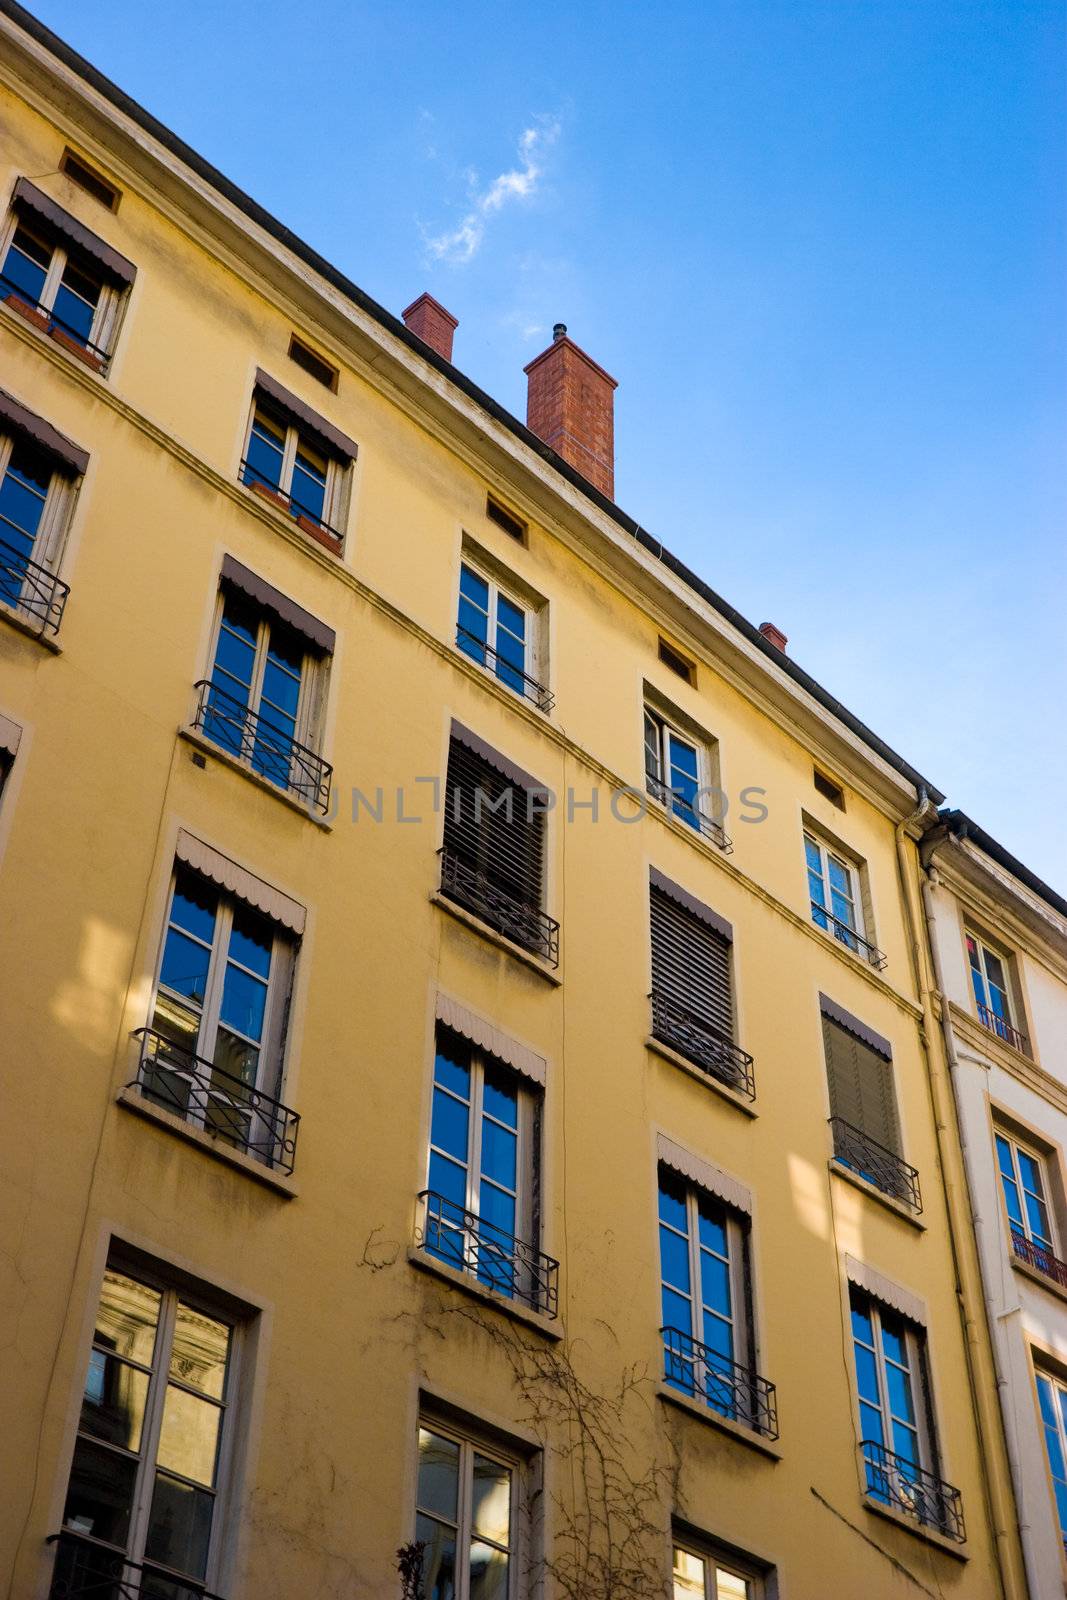 Yellow house facade with blue sky reflection in windows